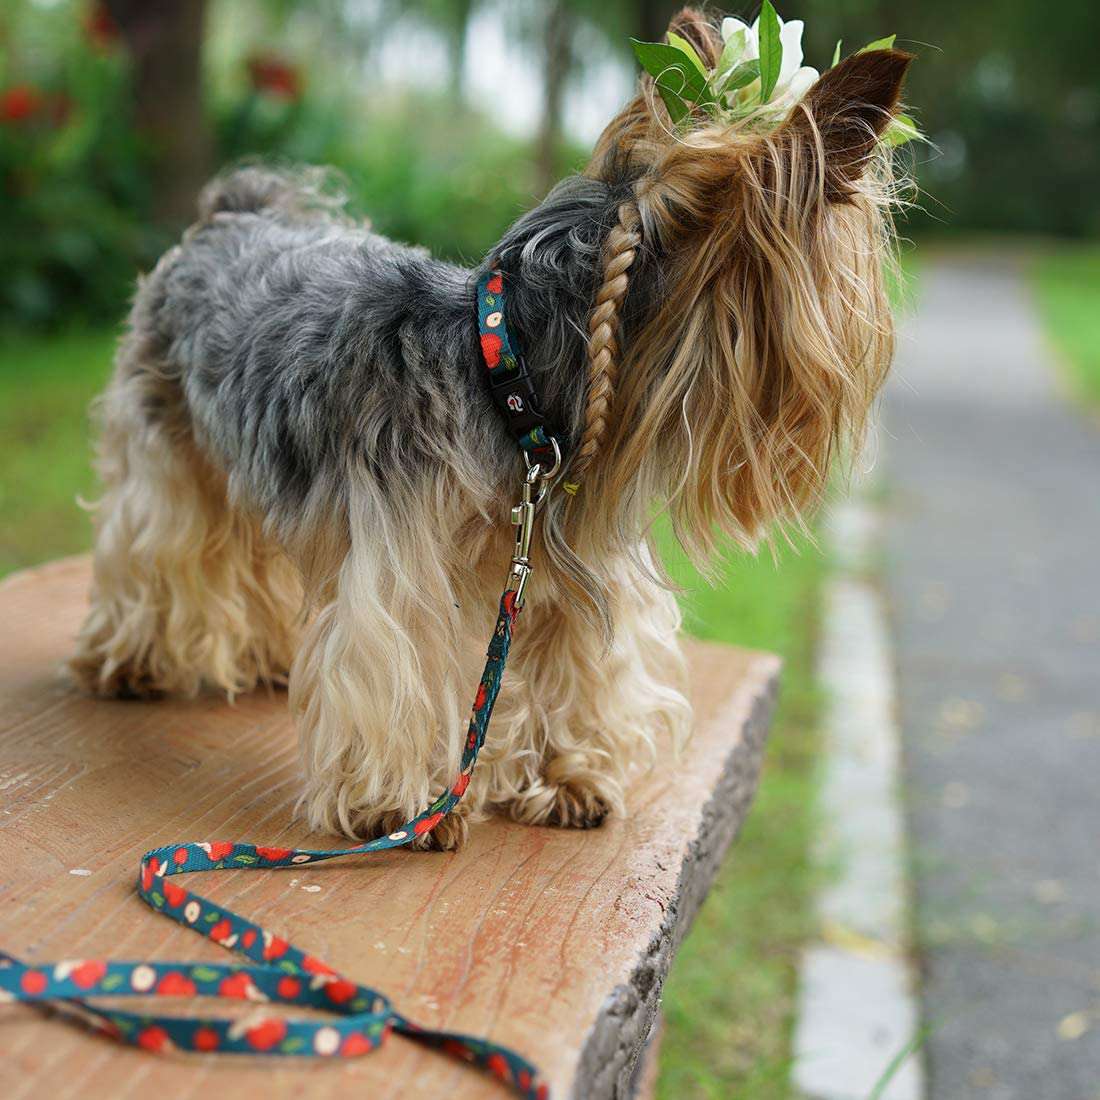 Dog wearing a Azuza Apple Dog Collar and Leash Set standing outdoors